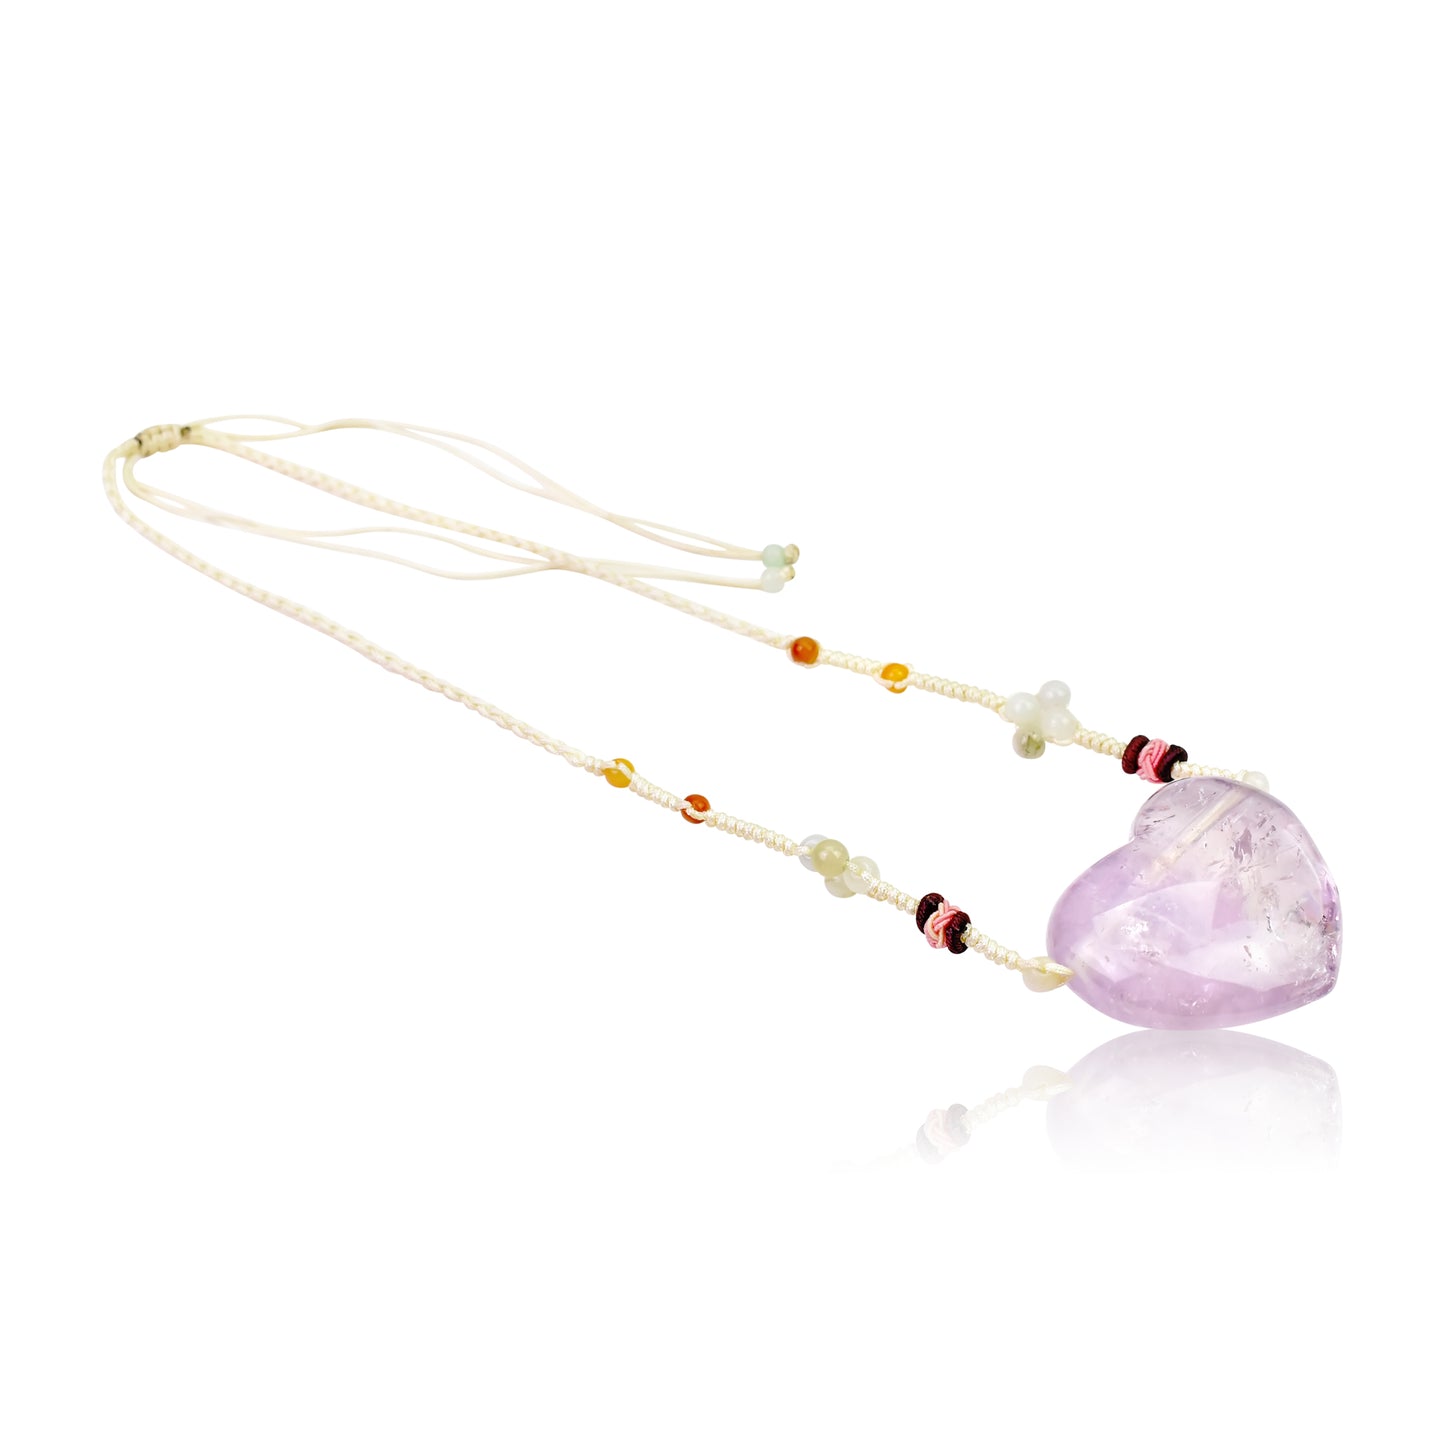 Add Romance to Your Look with a Colossal Amethyst Heart Necklace made with White Cord